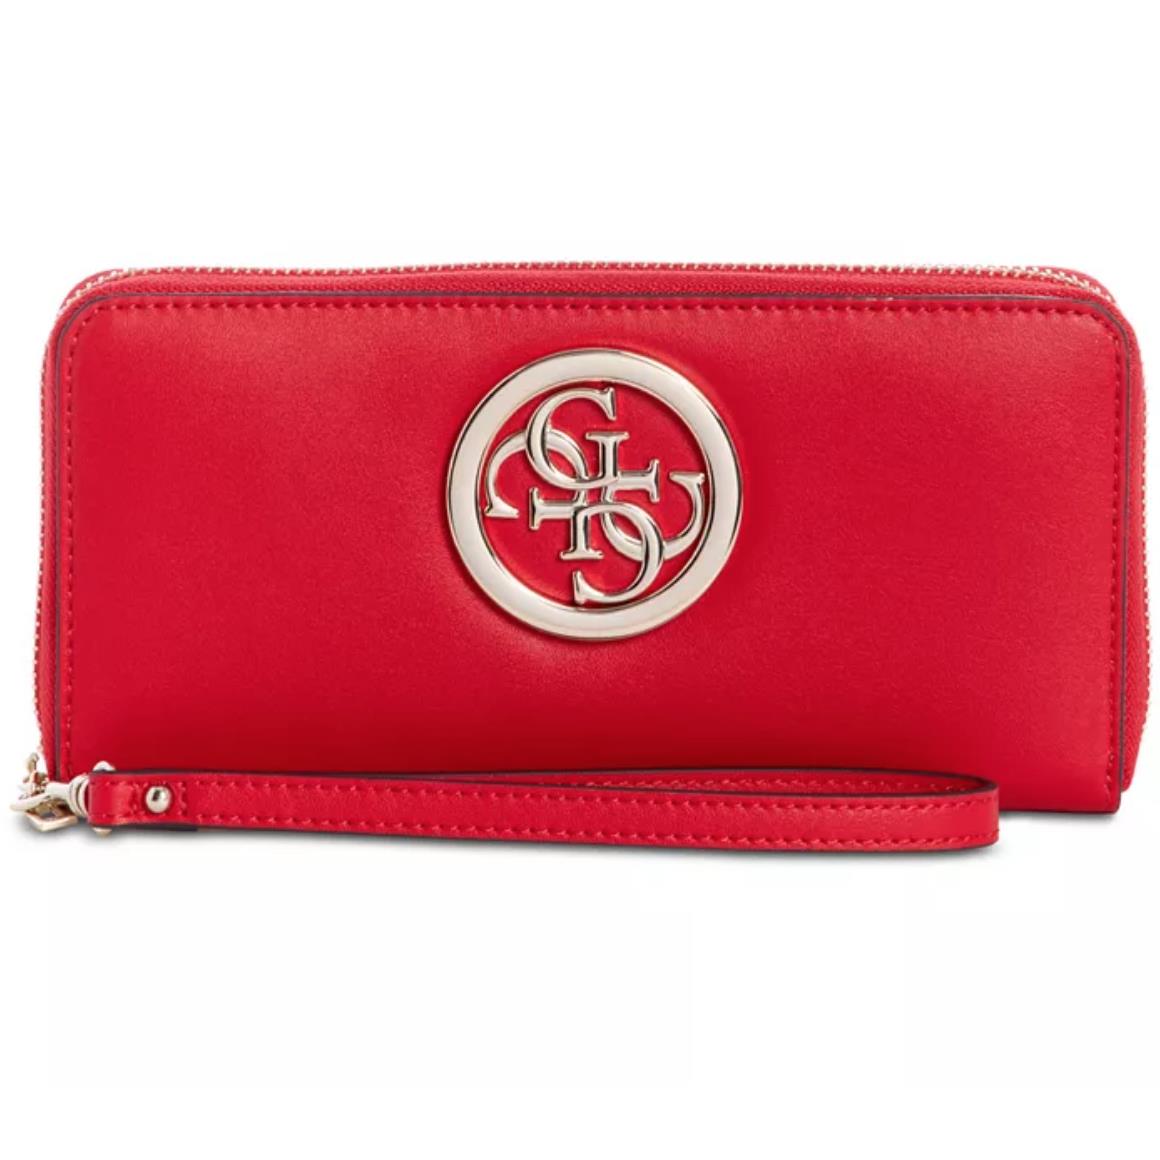 Guess Womens Red Rodeo Zip Around Wallet A1632